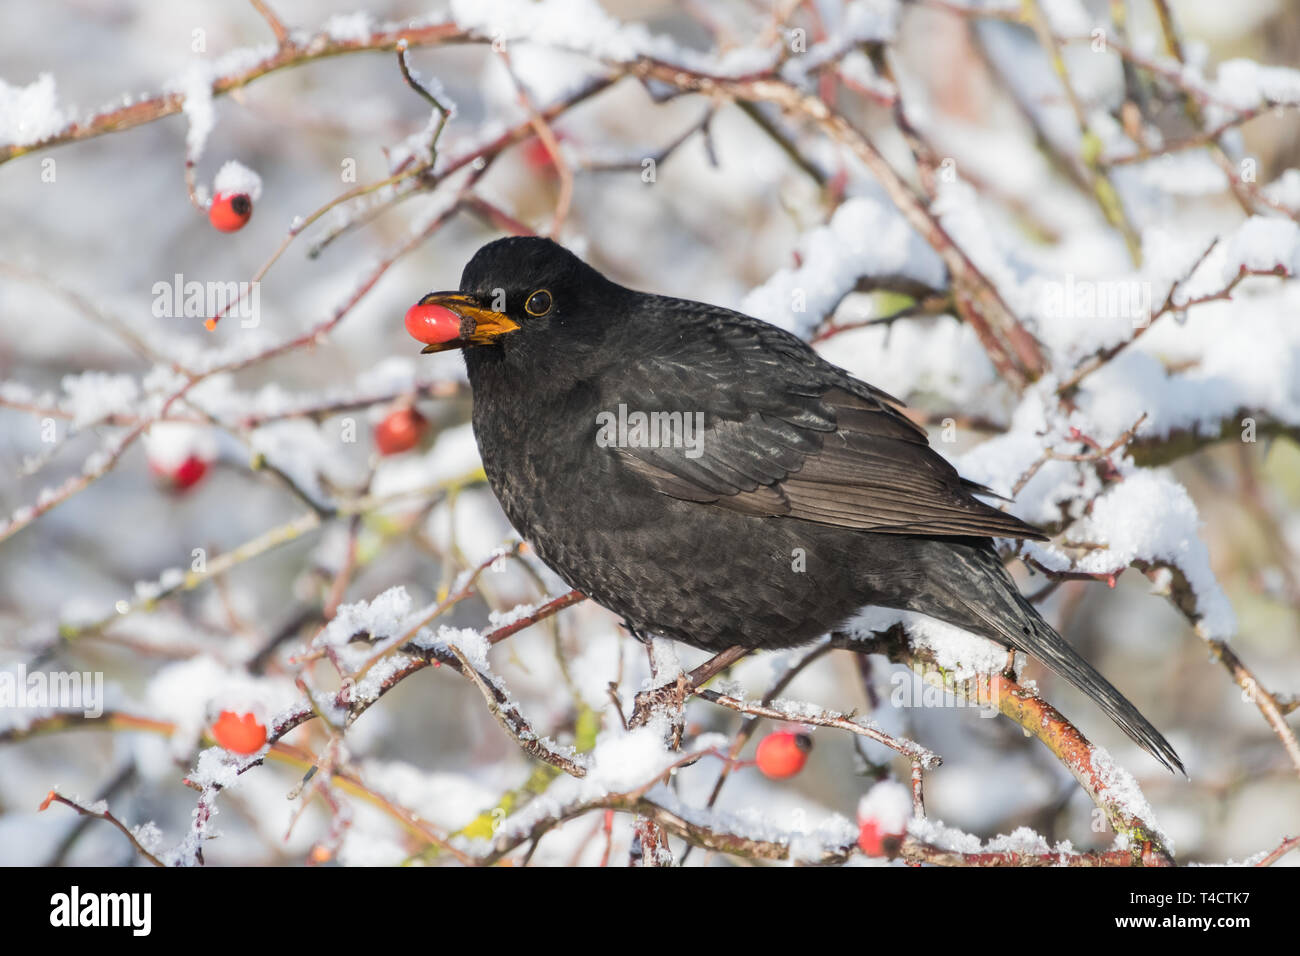 Blackbird with red berries of blueberry in its beak in a park in winter Stock Photo